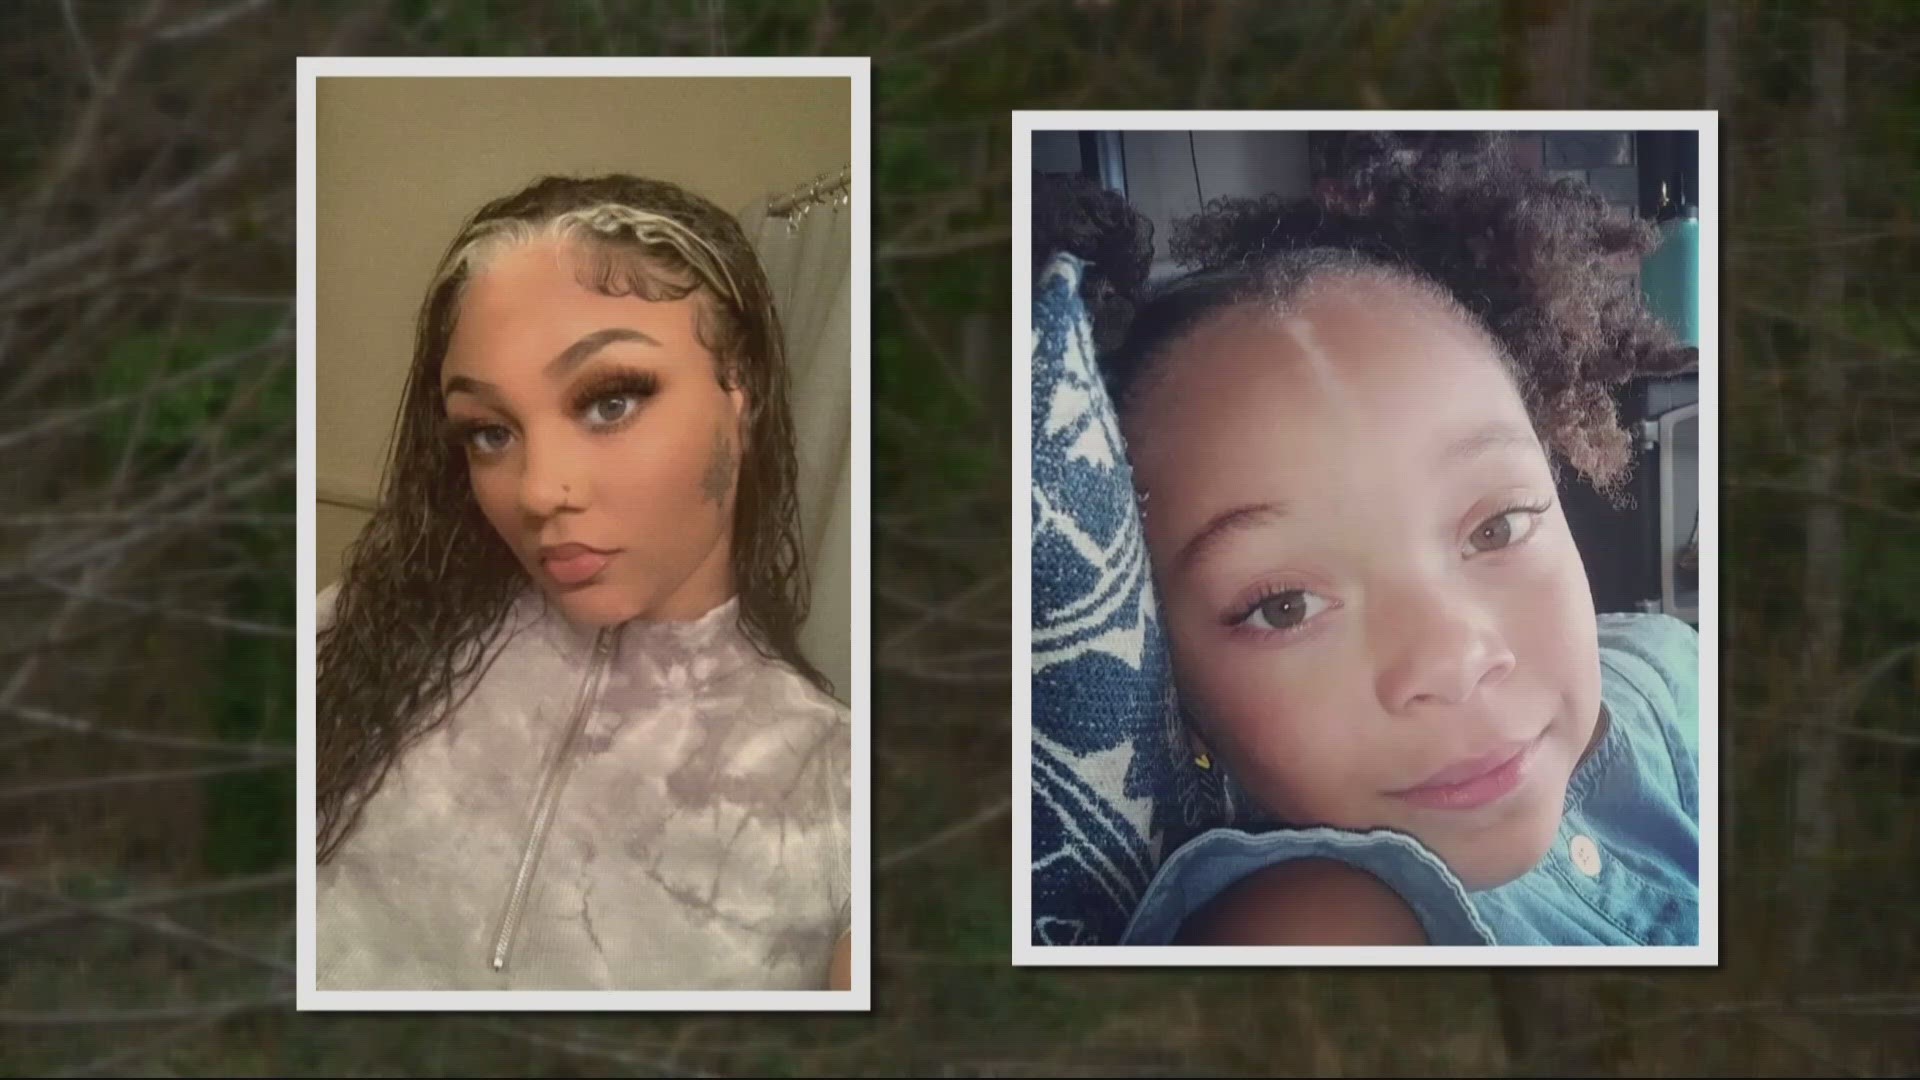 Warren was charged with the murders of ex-girlfriend Meshay Melendez and her 7-year-old daughter, Layla Stewart, Vancouver police announced Friday